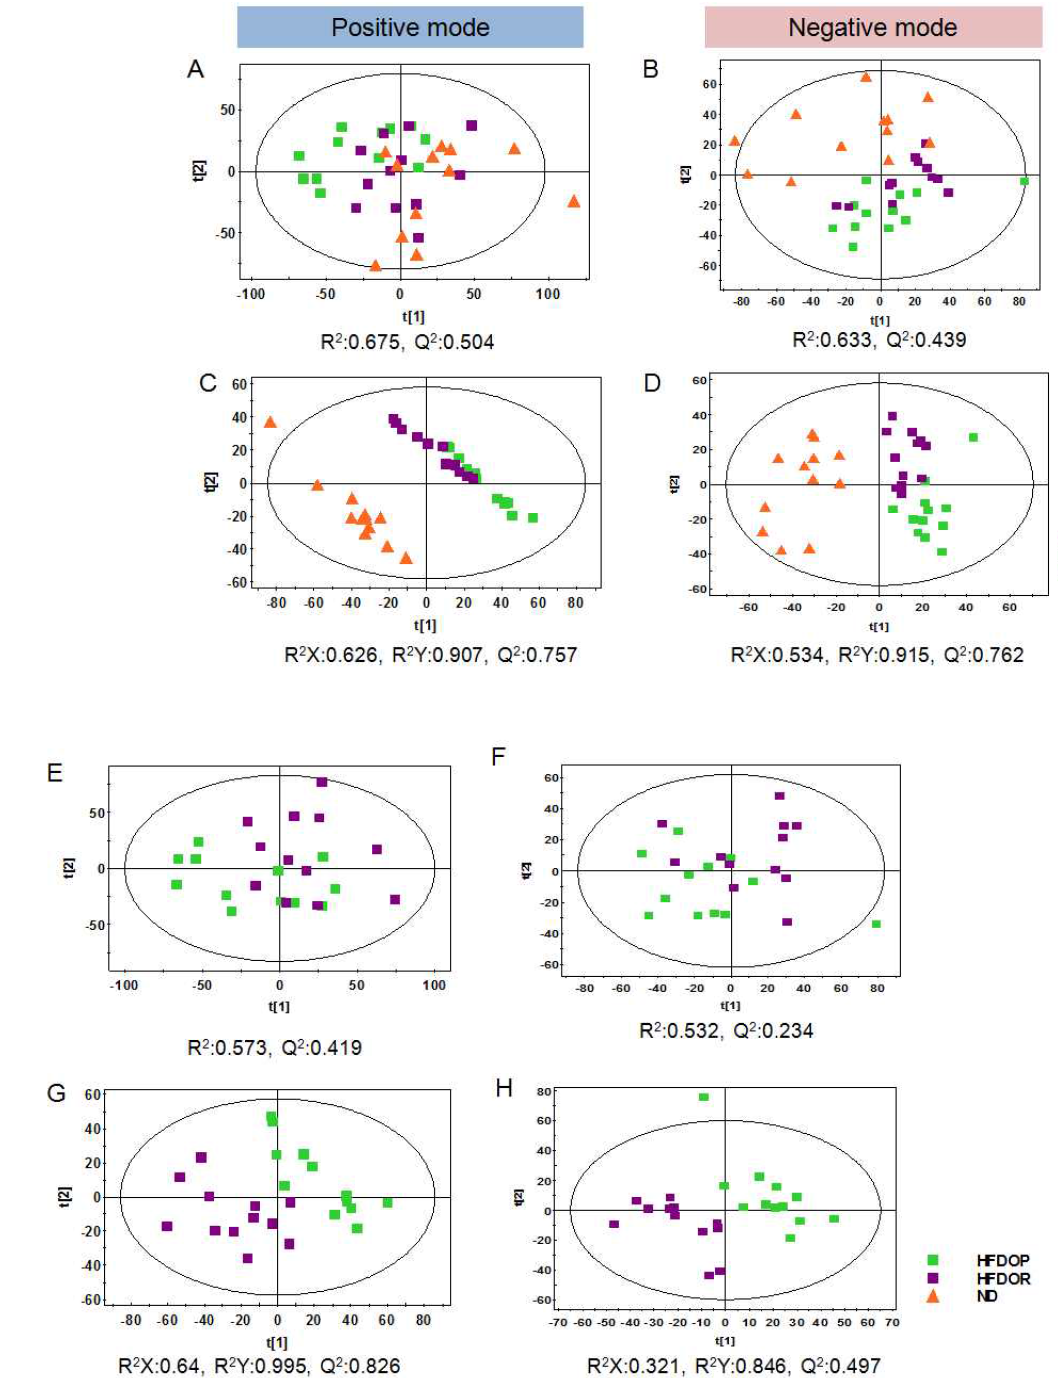 Principal component analysis (PCA), partial least squares-discriminant analysis (PLS-DA) score scatter plots obtained from the UPLC/Q-TOF MS spectra of plasma lipid extract for global analysis, which is demonstrating a clear differentiation among the groups